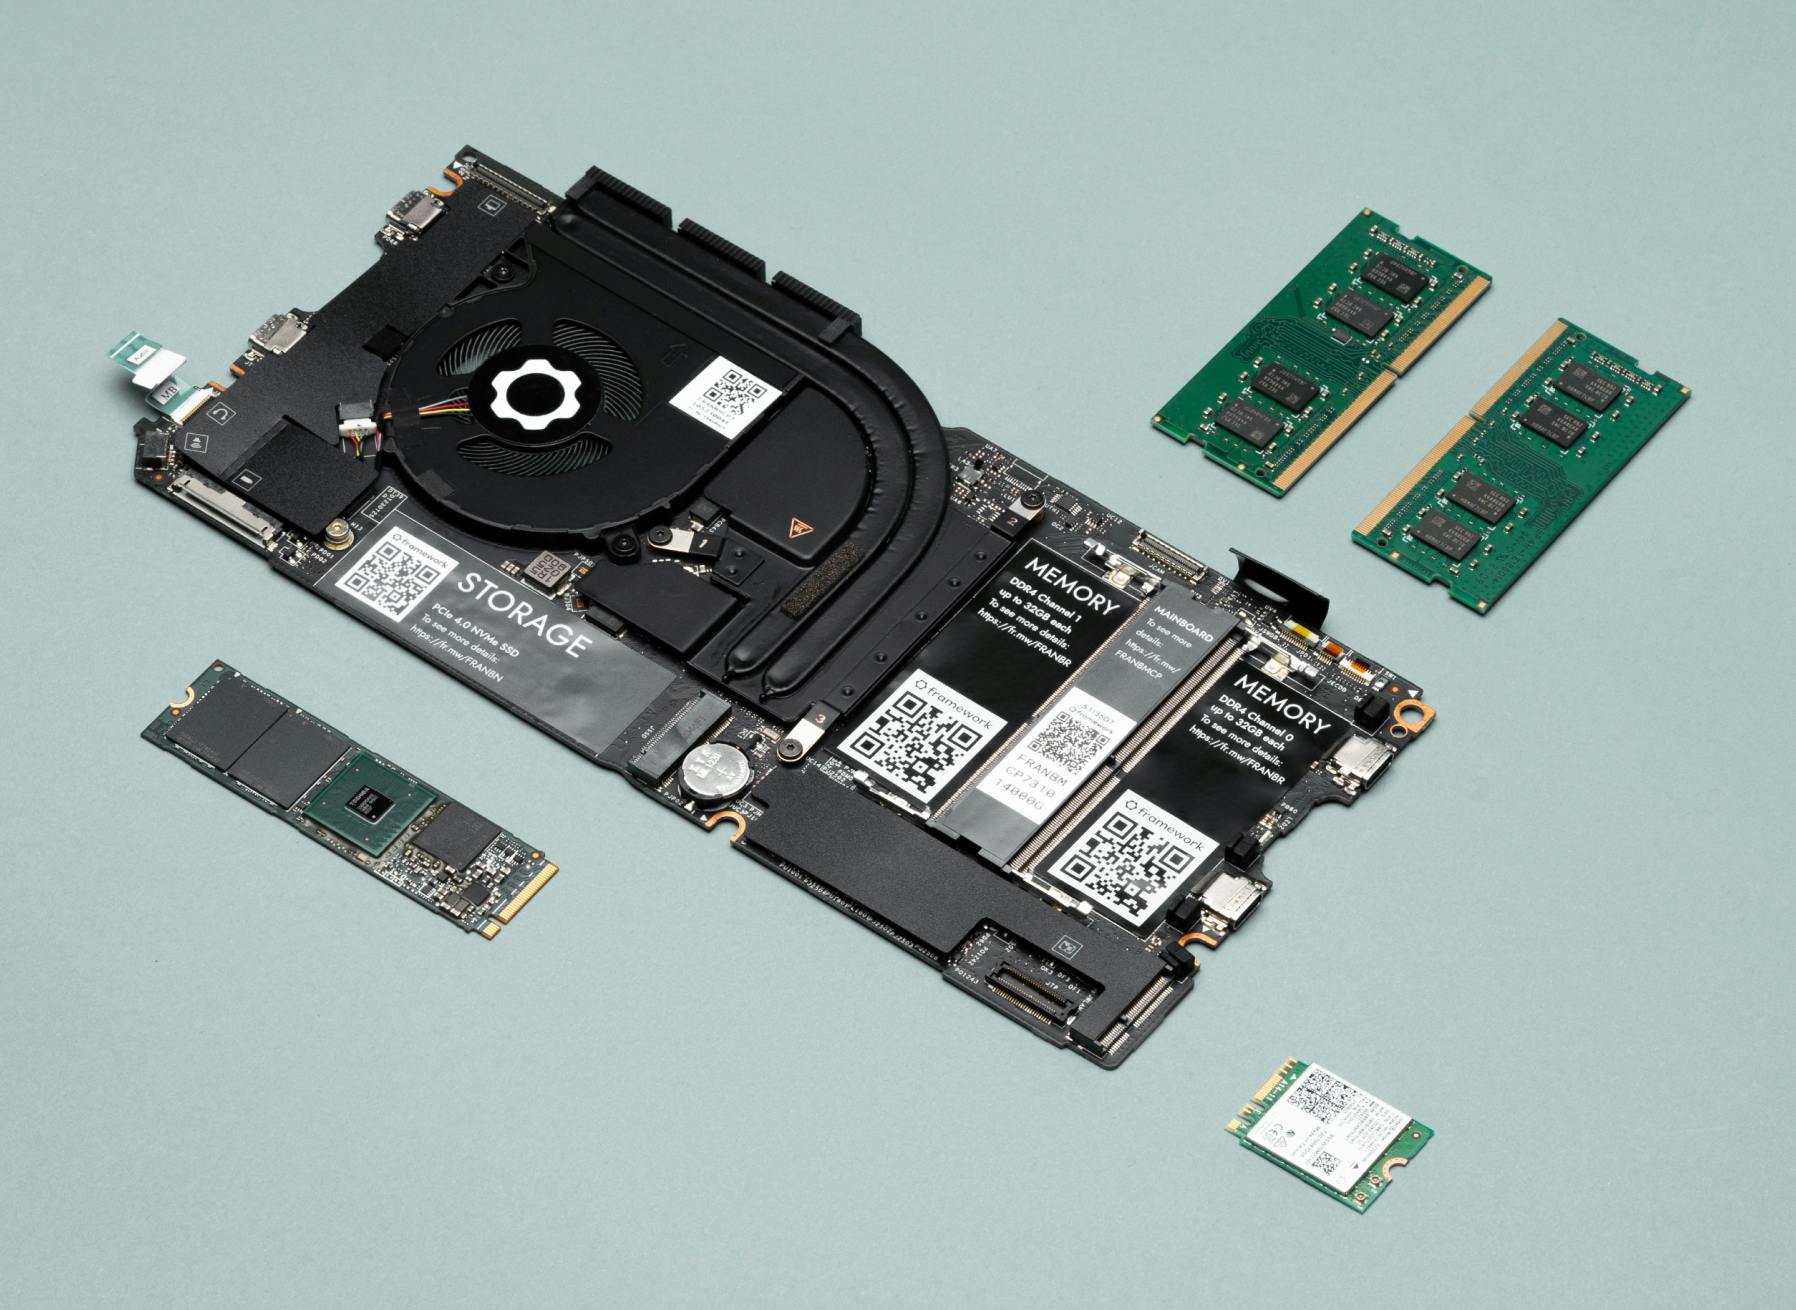 Framework Laptop modules including mainboard, SSD, RAM and WiFi